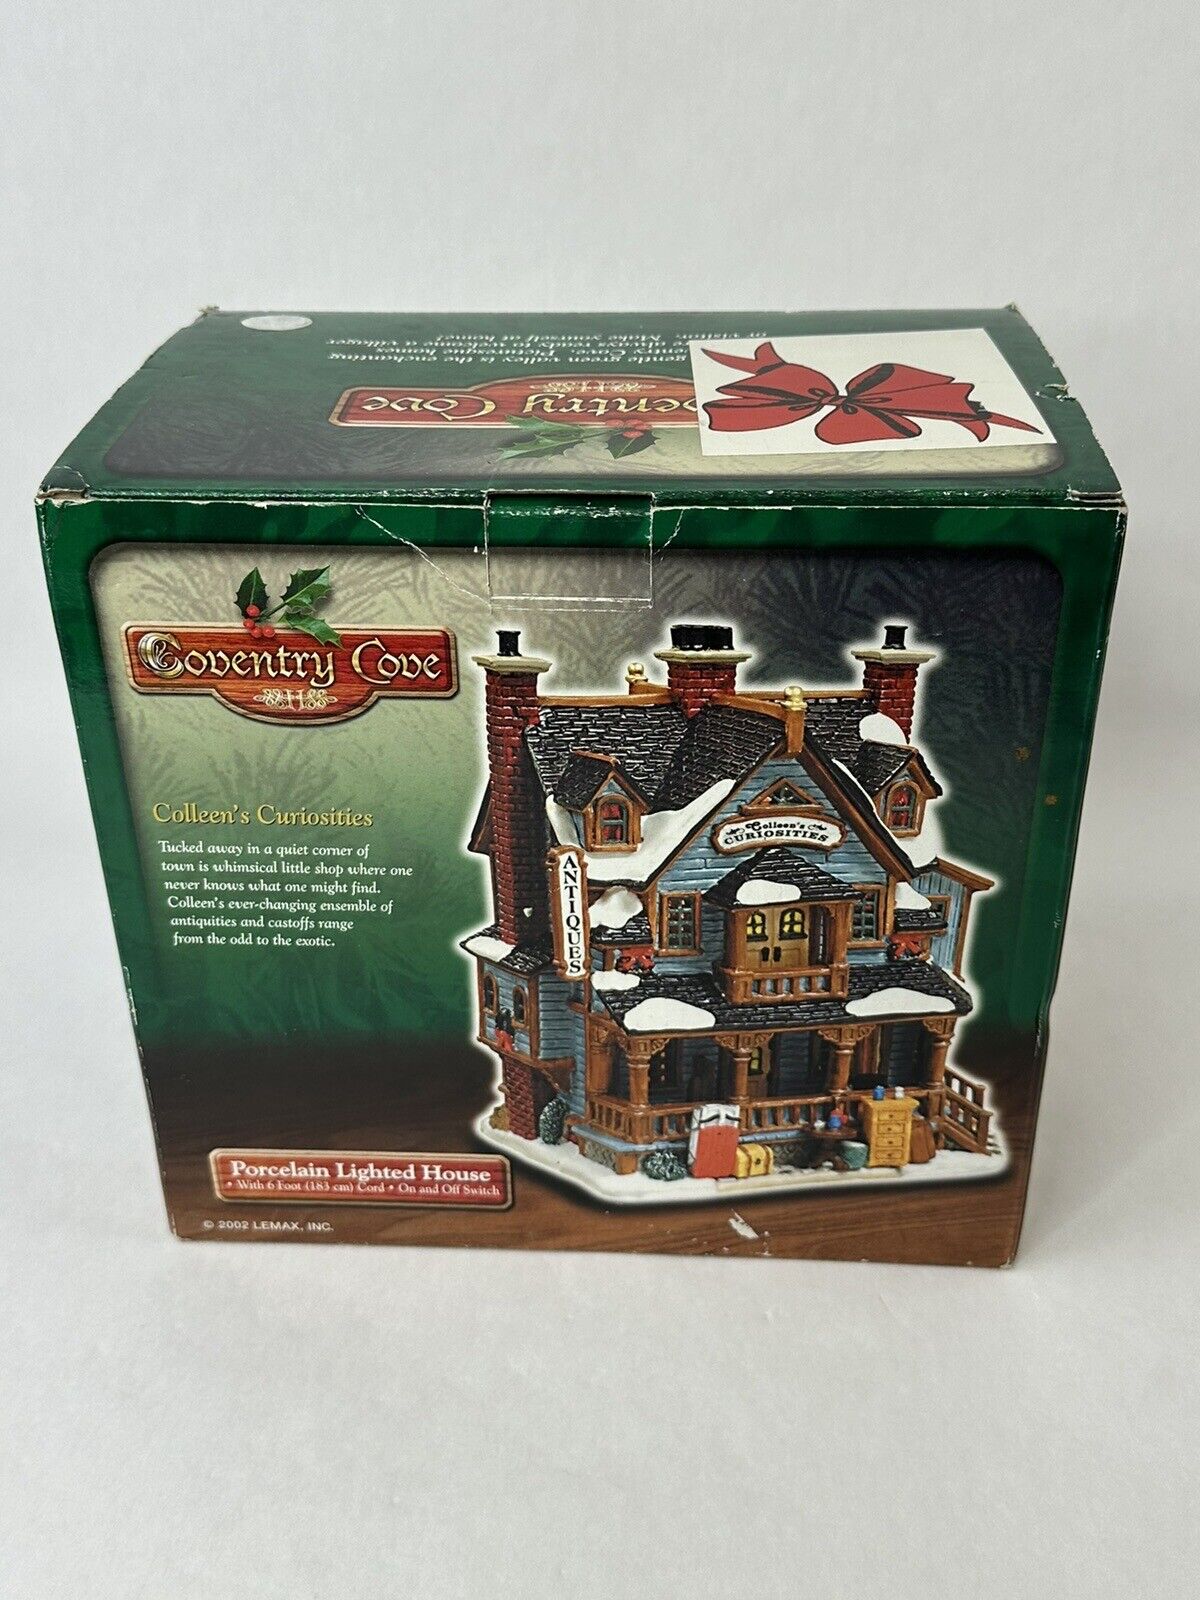 Lemax Coventry Cove  Porcelain Lighted House “Colleen’s Curiosities” 2002 NEW